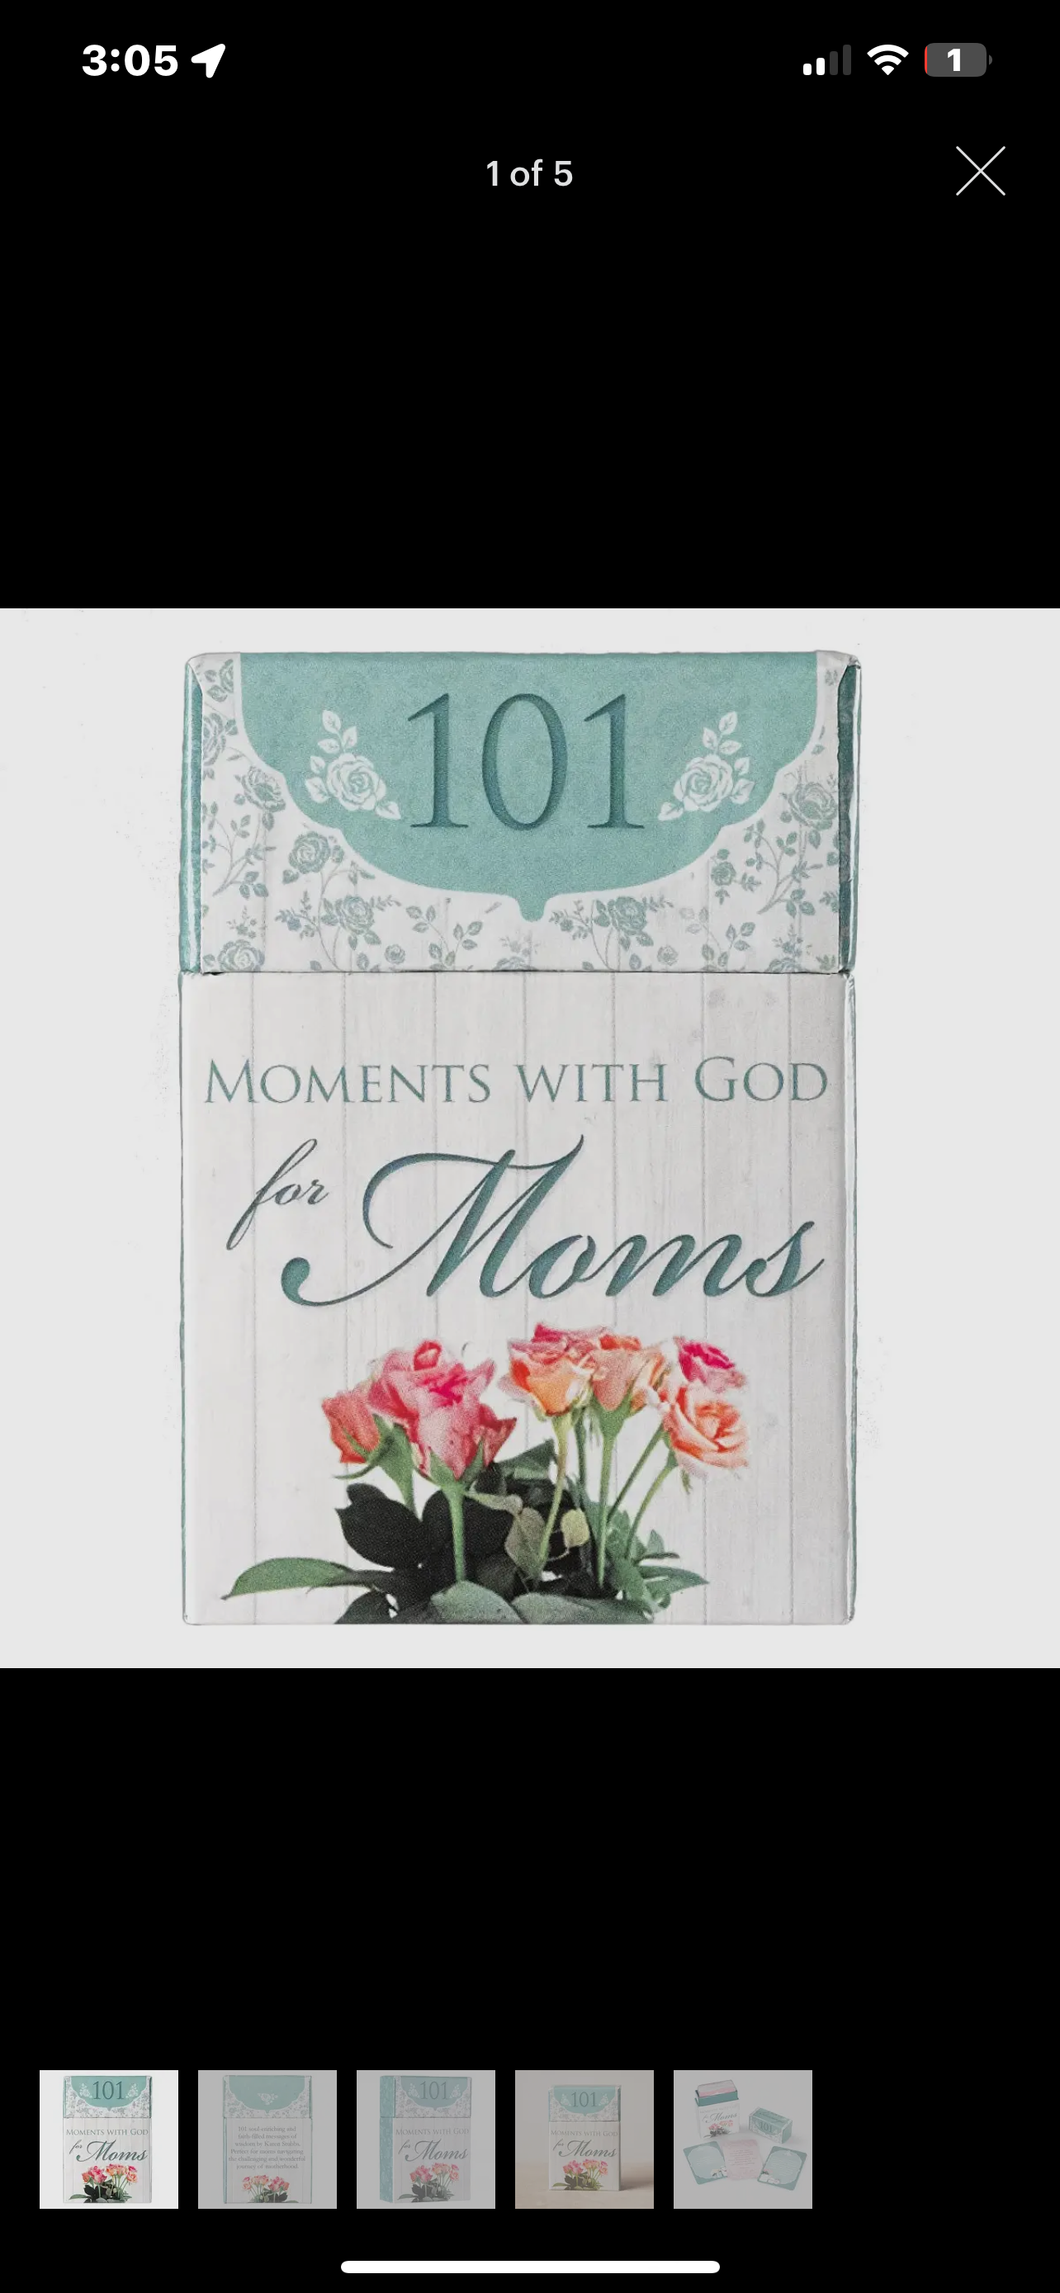 Christian Art Gifts BX106 Box of Blessings Moments With Hod For Moms